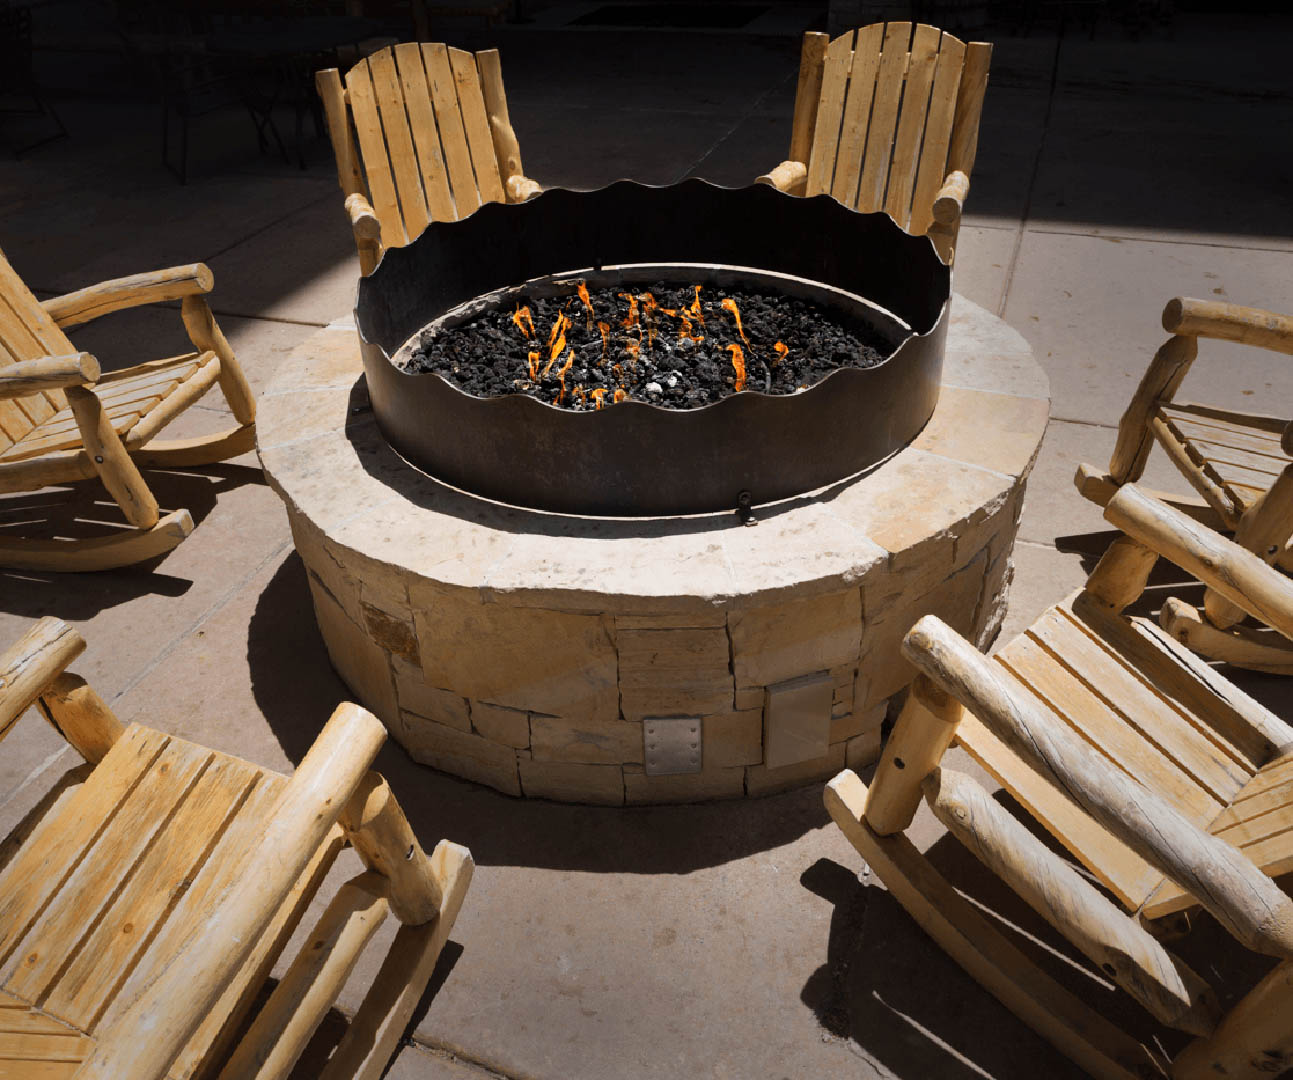 Backyard Features for Families Fire Pit Image